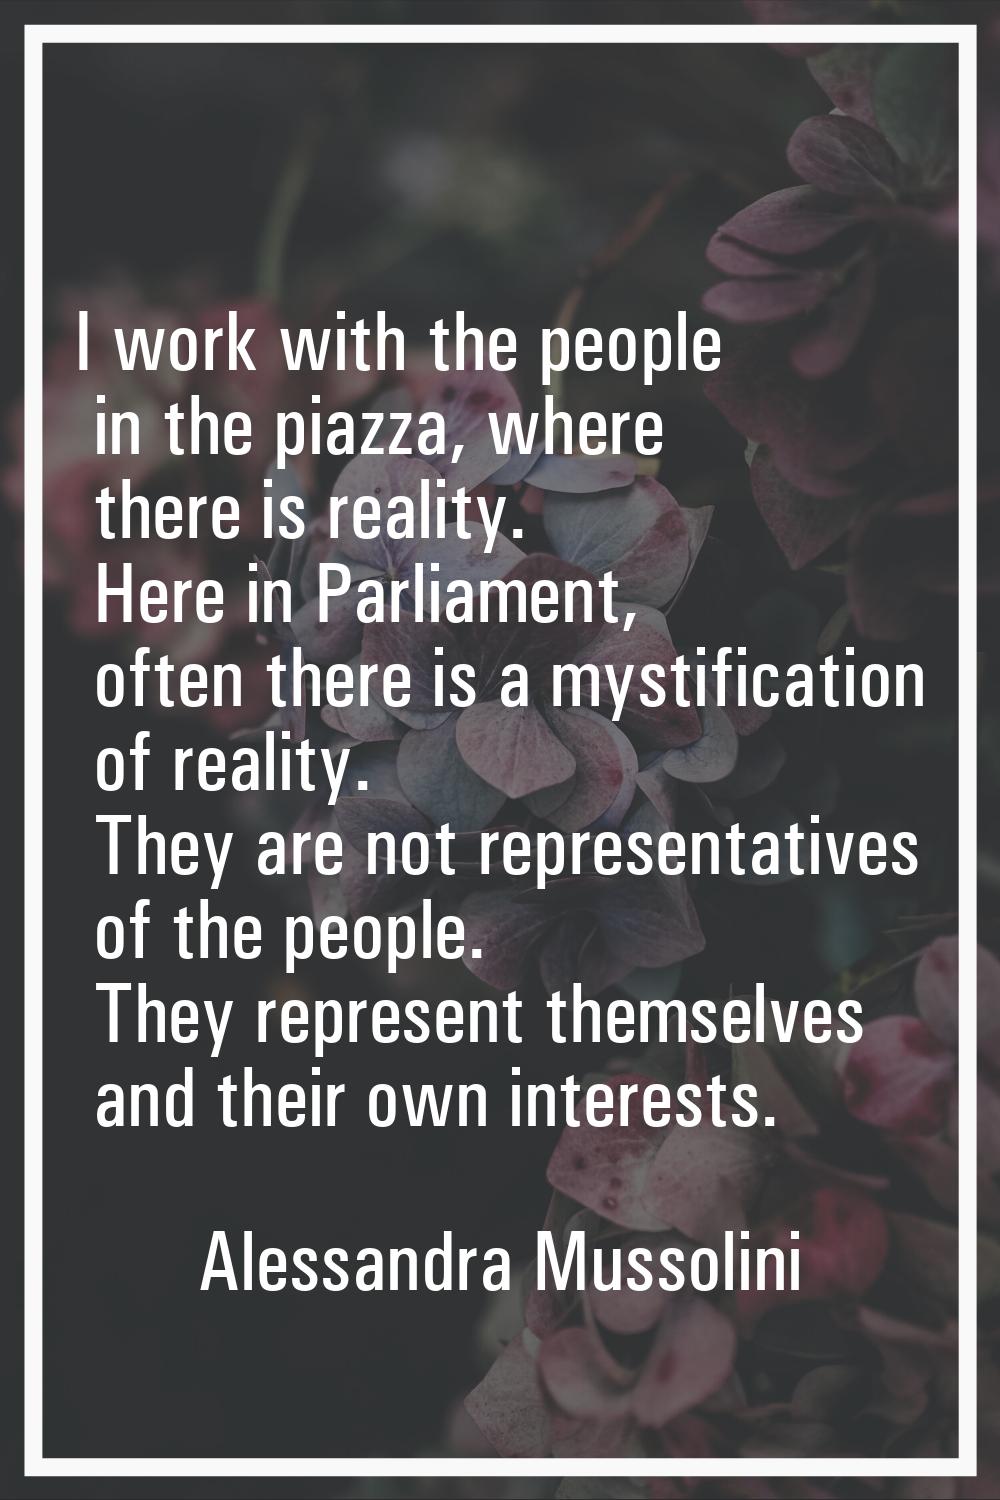 I work with the people in the piazza, where there is reality. Here in Parliament, often there is a 